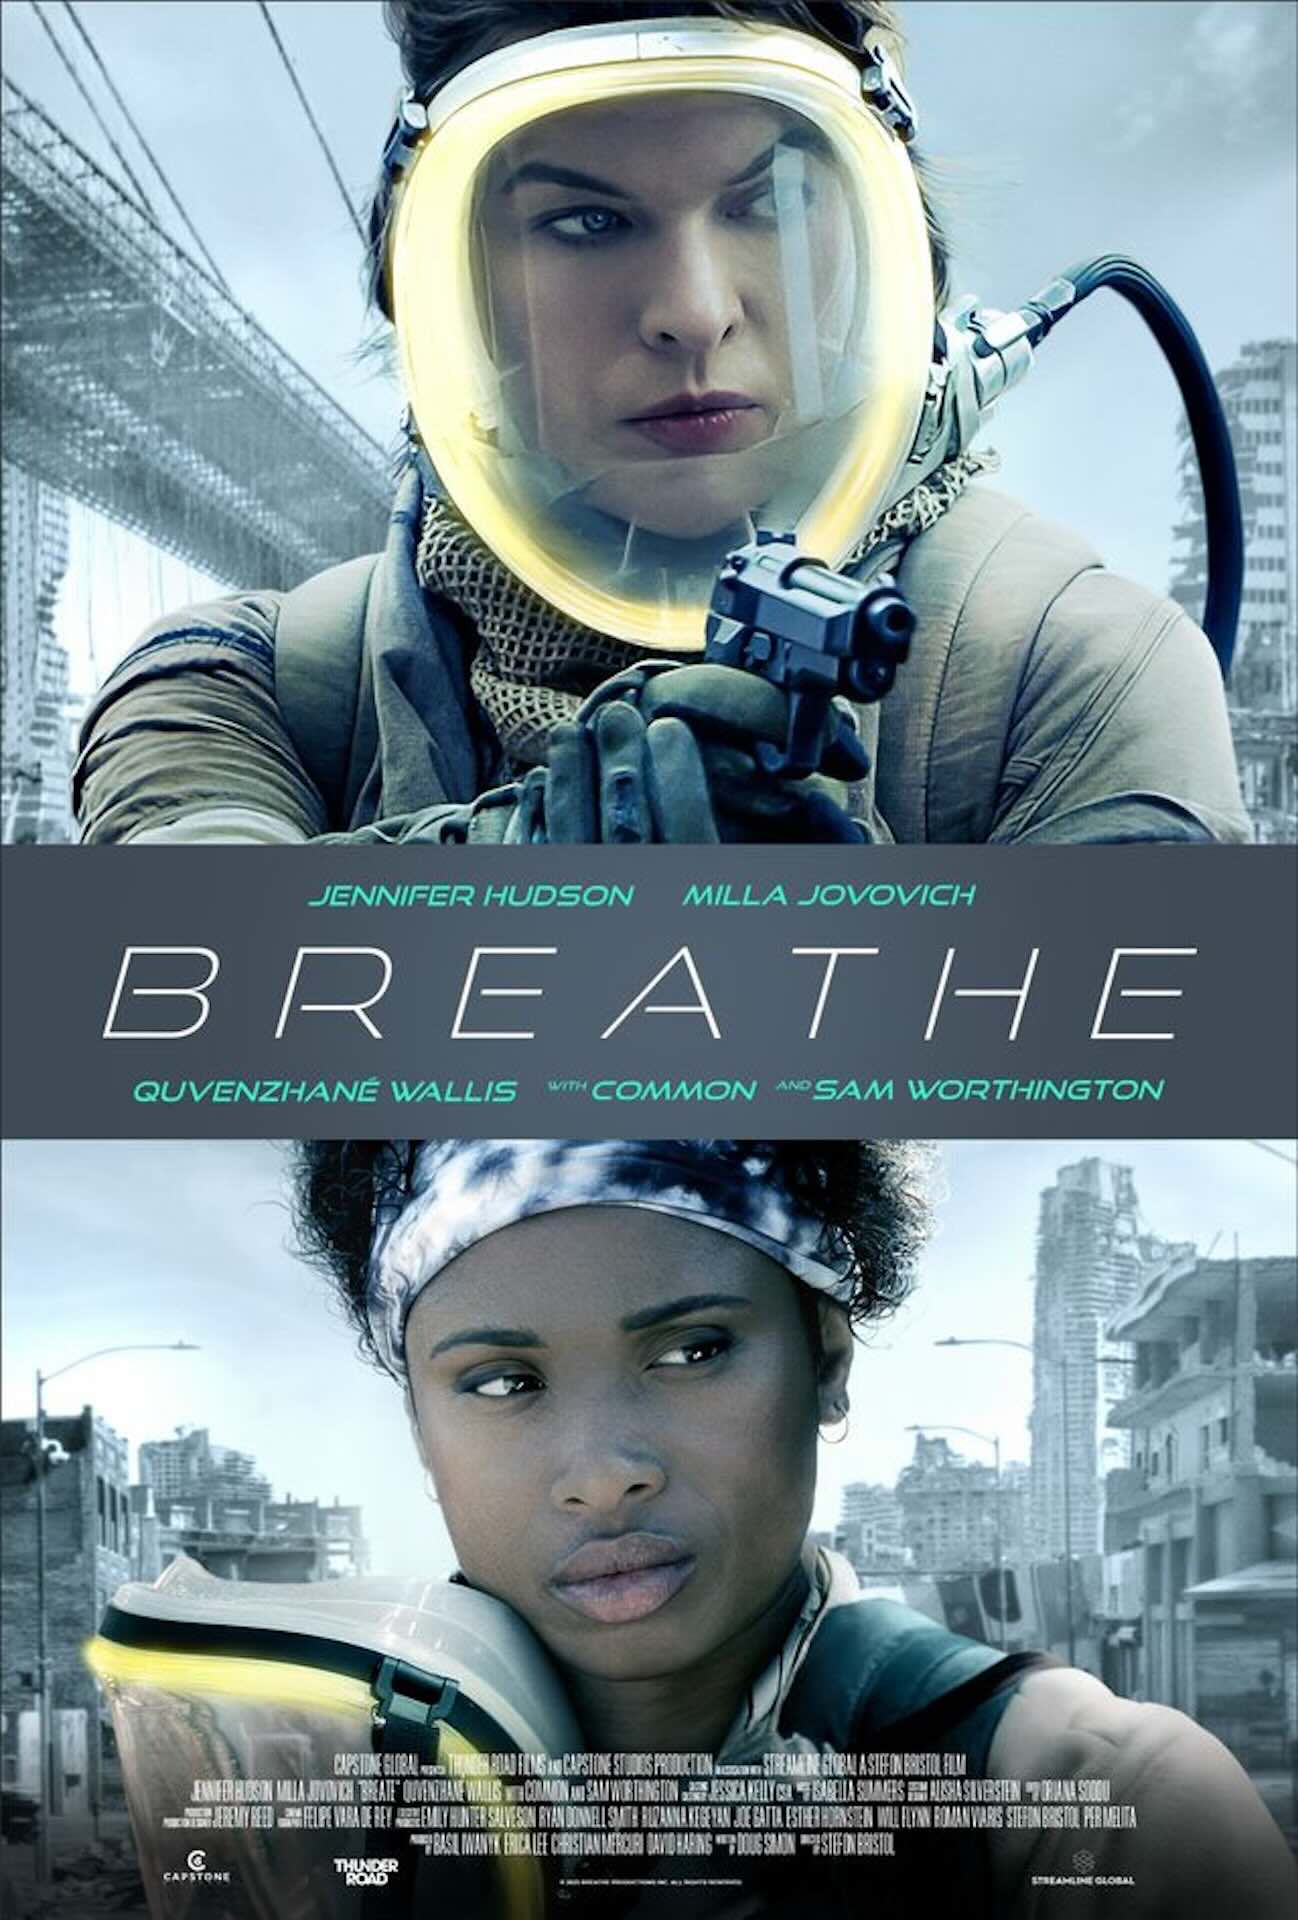 Theatrical poster for BREATHE, a Variance Films / Warner Brothers release. Photo courtesy of Breathe Productions Inc.